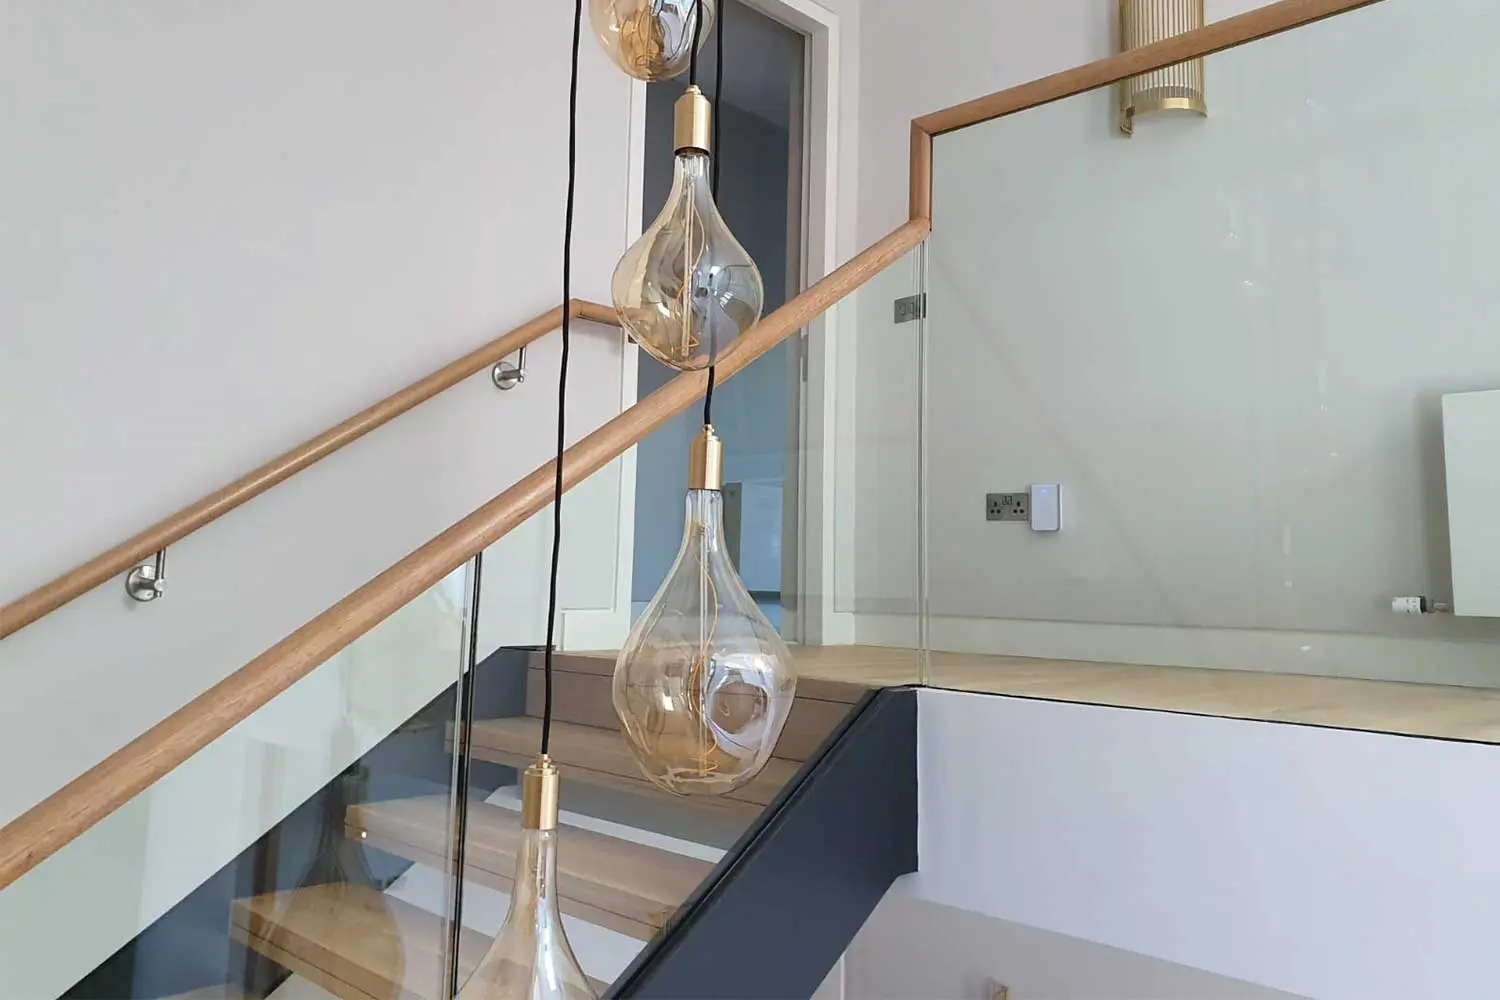 OMC Technologies - Glenlion Feature Staircase & Balustrade